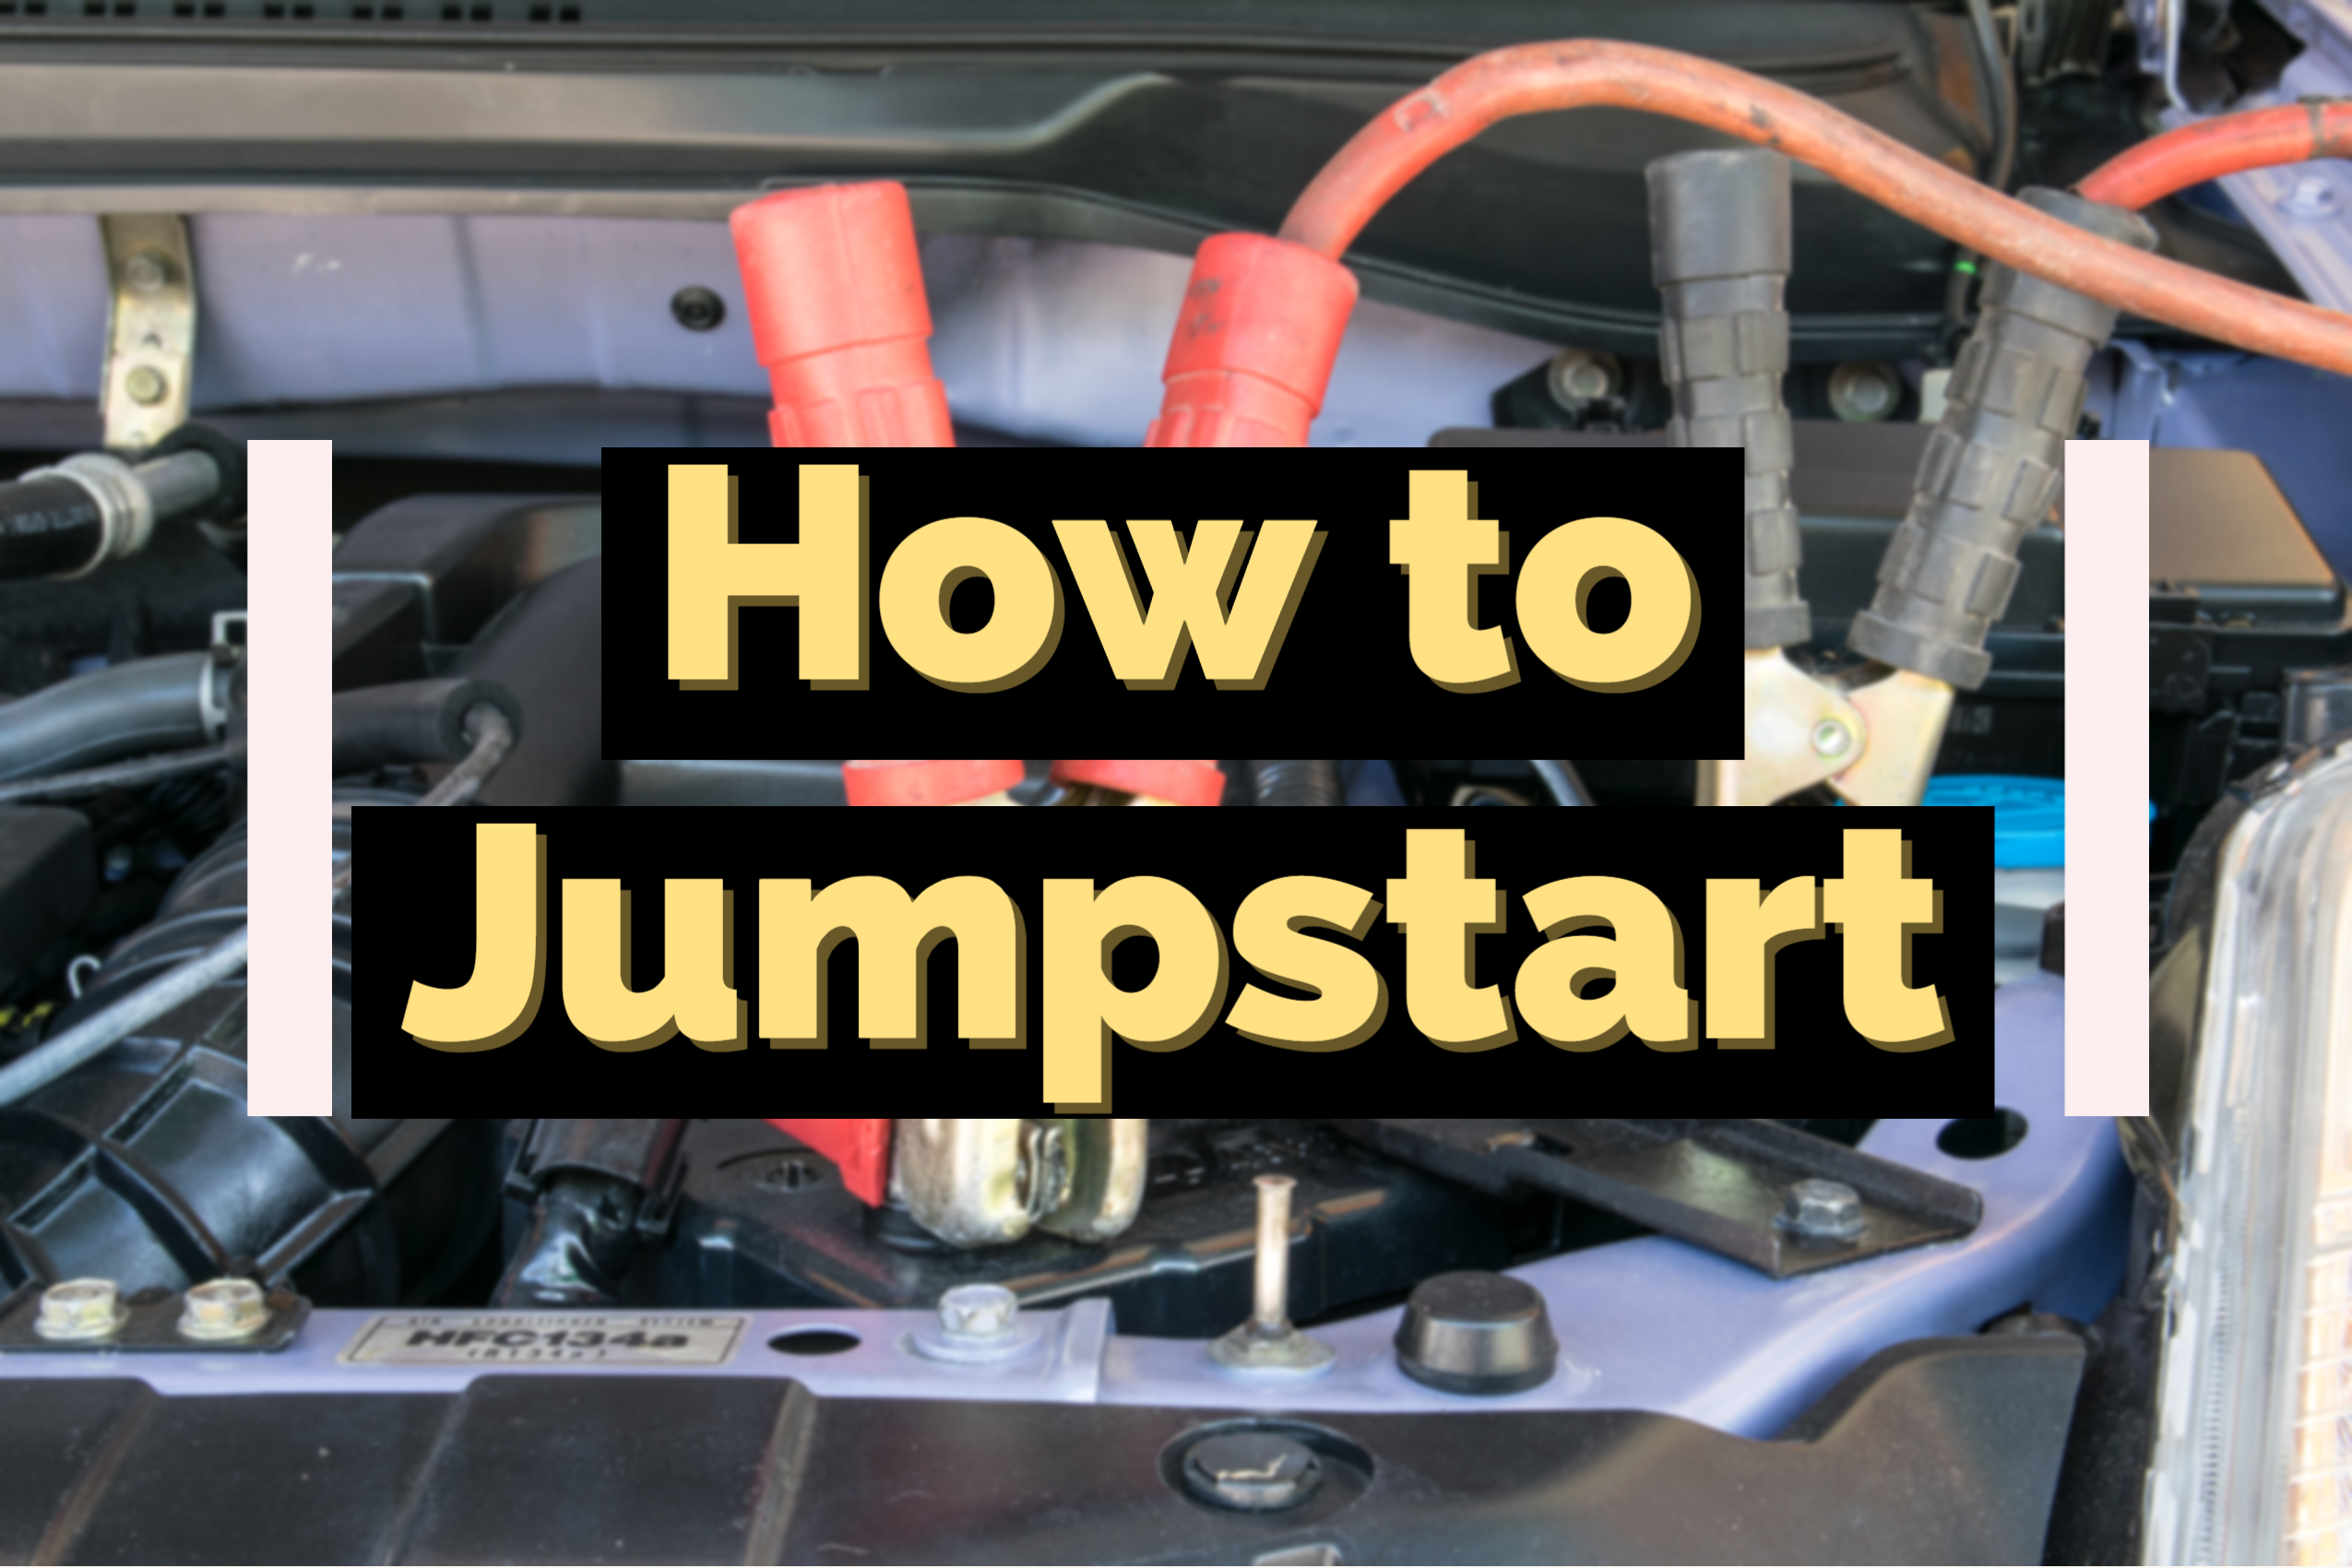 How to jumpstart your car? In 10 steps